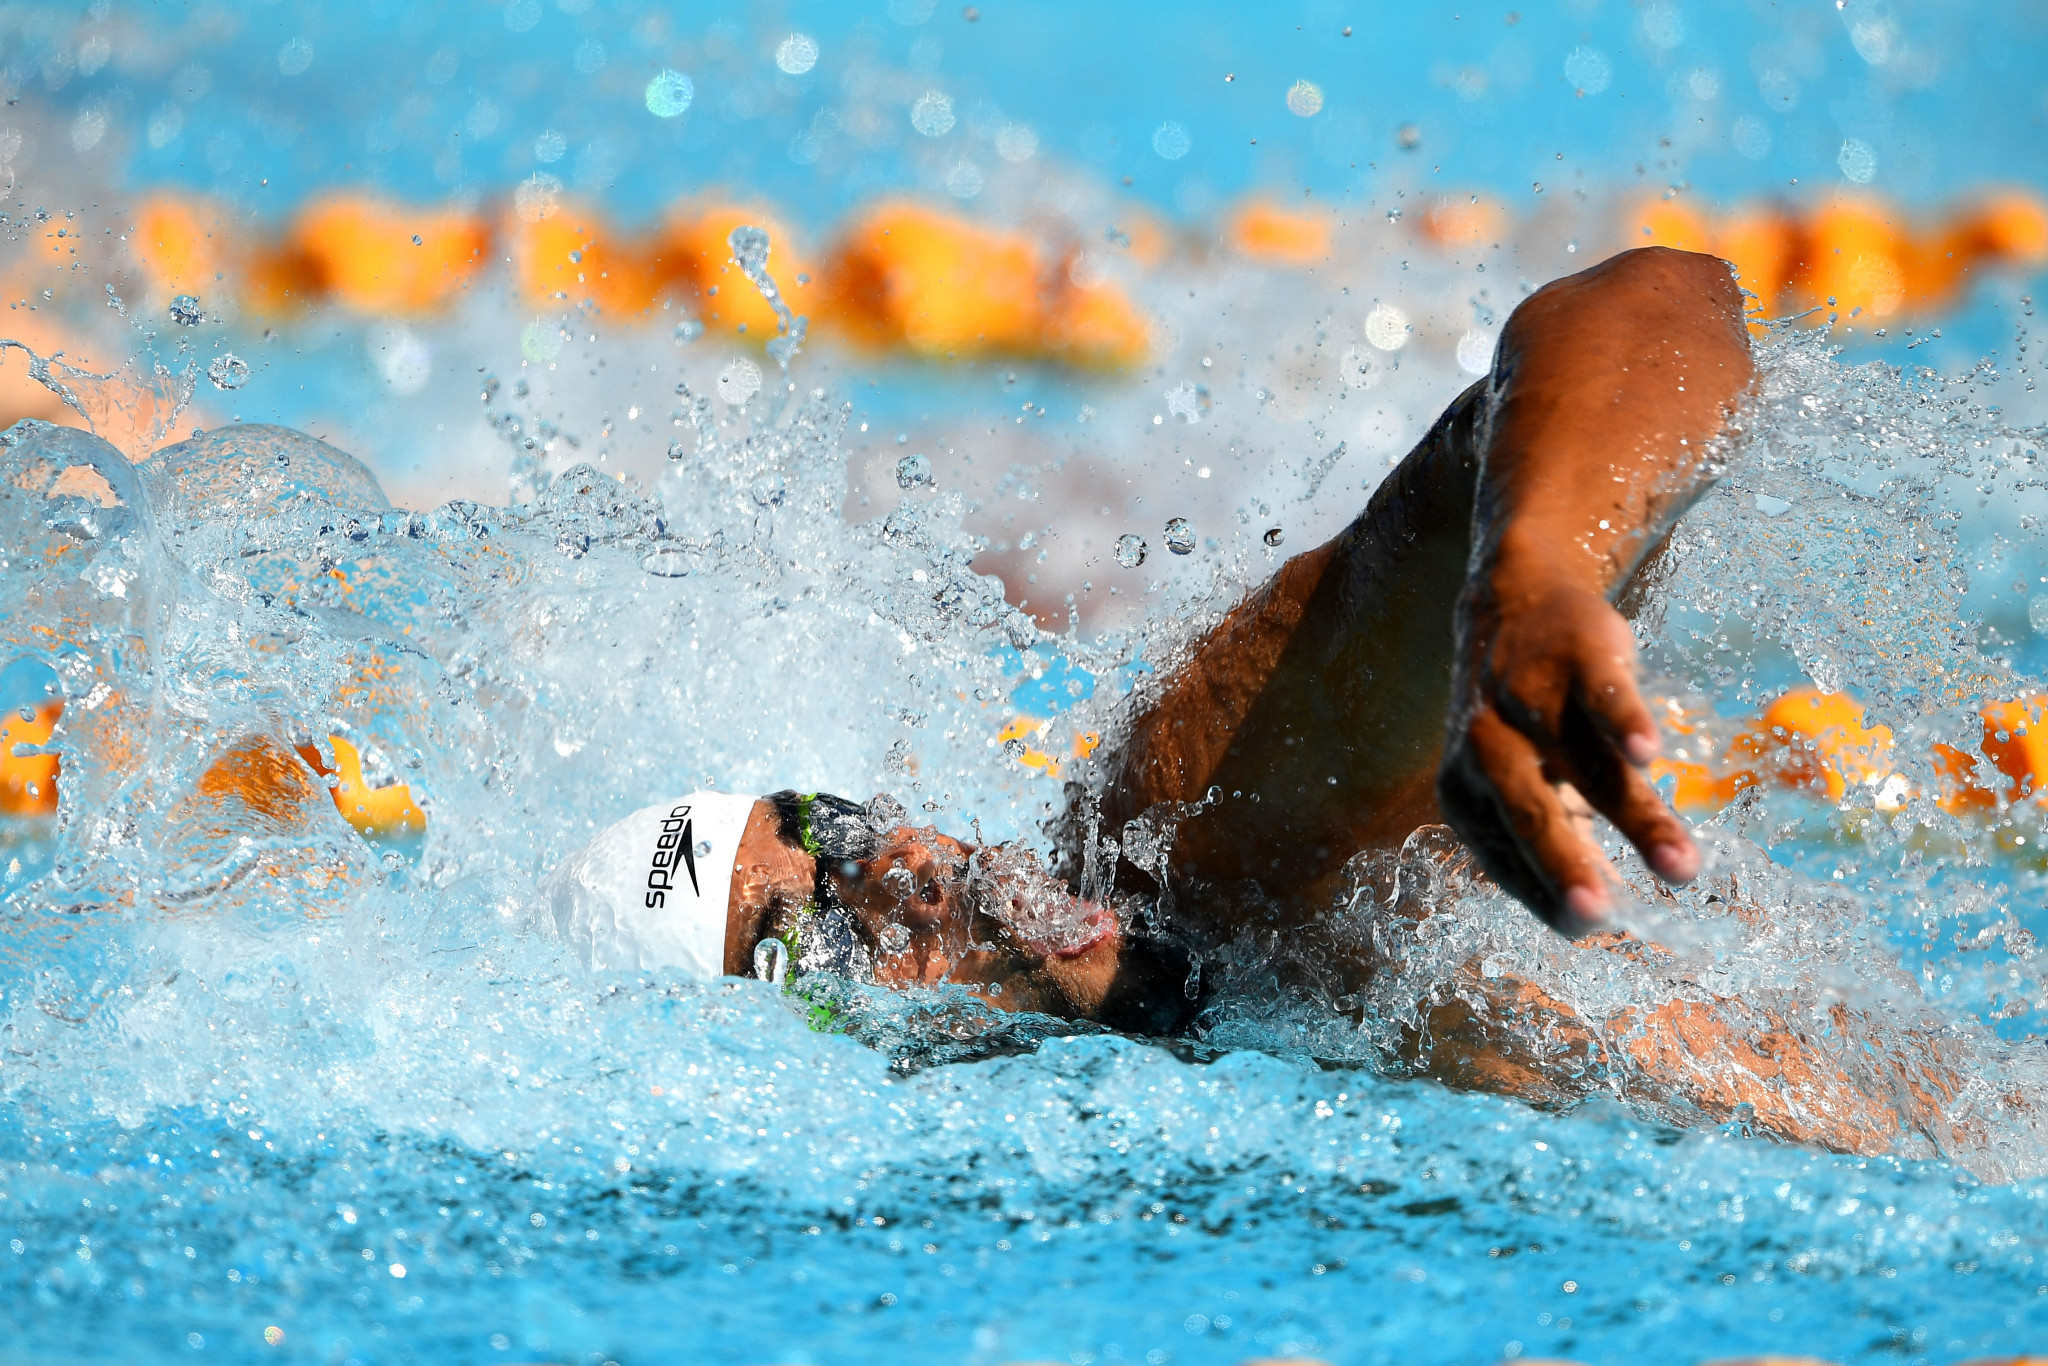 Swimmer Ben Dillon competed for St Helena at Gold Coast 2018 ©Getty Images